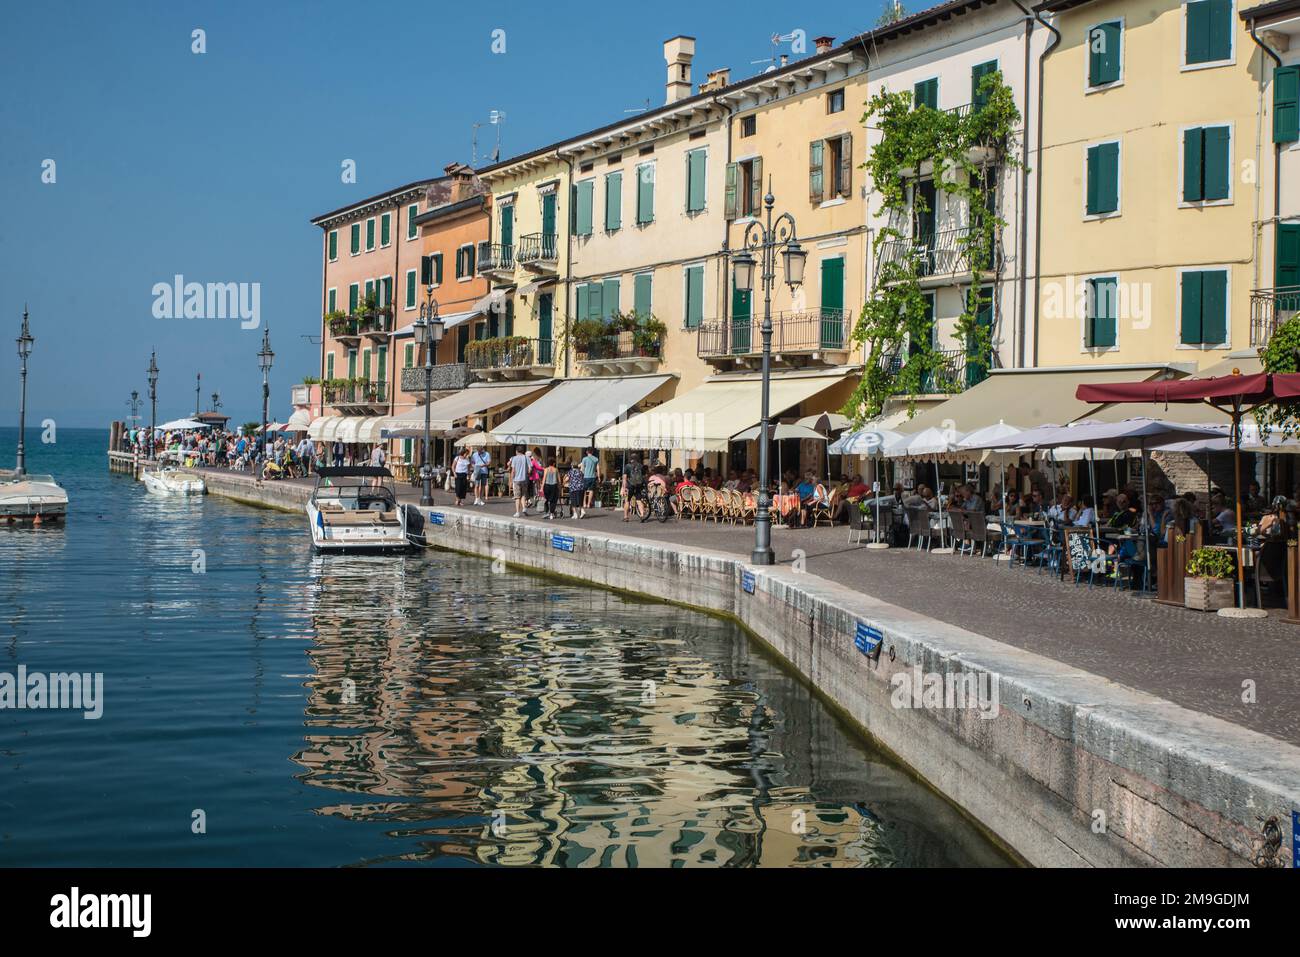 Waterfront cafes and restaurants in Lazize, Lake Garda, Italy Stock Photo